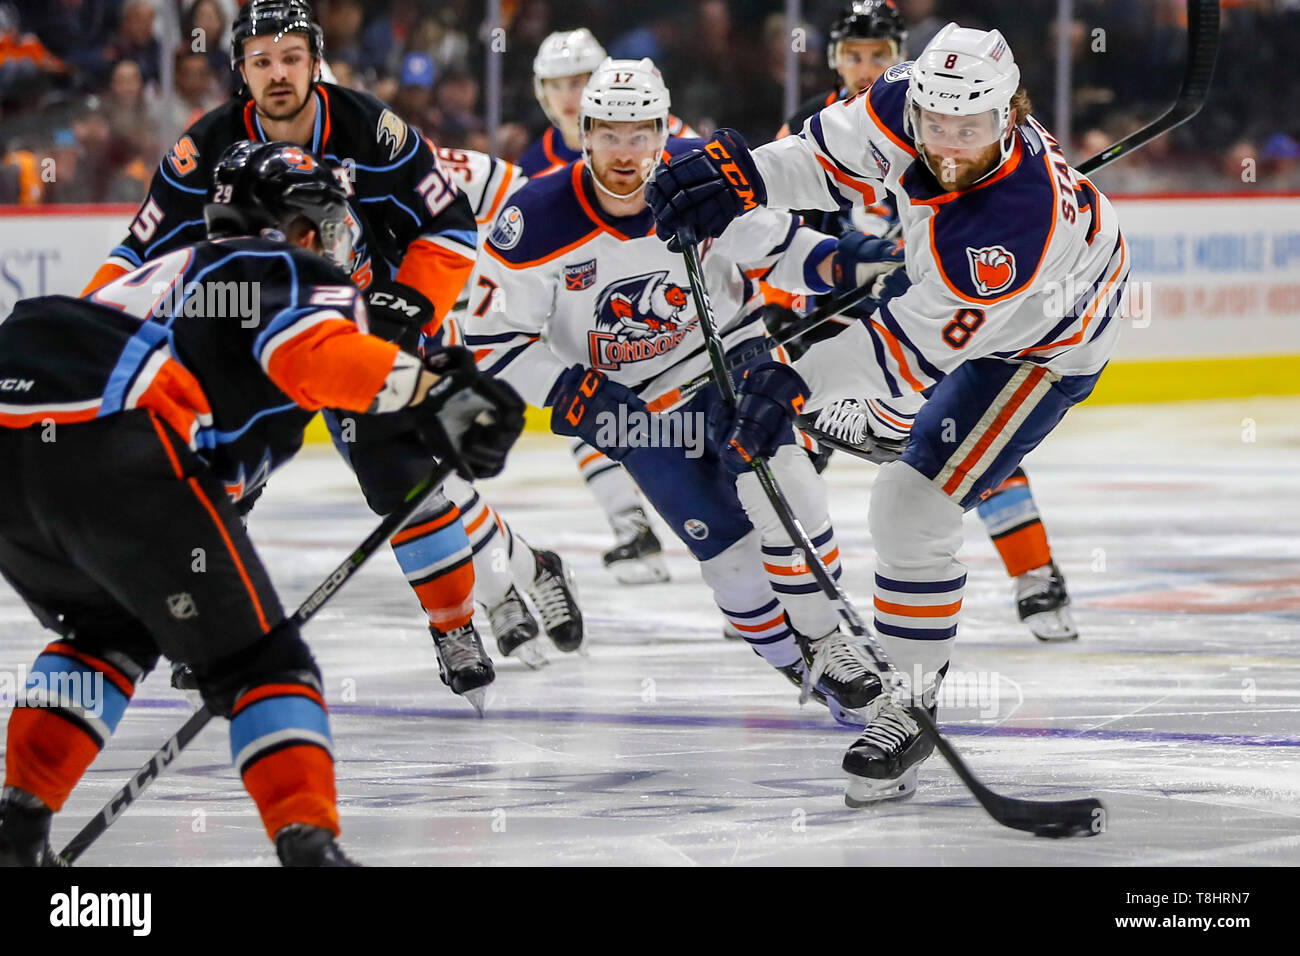 San Diego, California, USA. 8th May, 2019. Ryan Stanton (8) of Bakersfield Condors passes the puck. Bakersfield Condors vs San Diego Gulls AHL Game at Pechanga Area San Diego in San Diego, California. Michael Cazares/Cal Sport Media/Alamy Live News Stock Photo